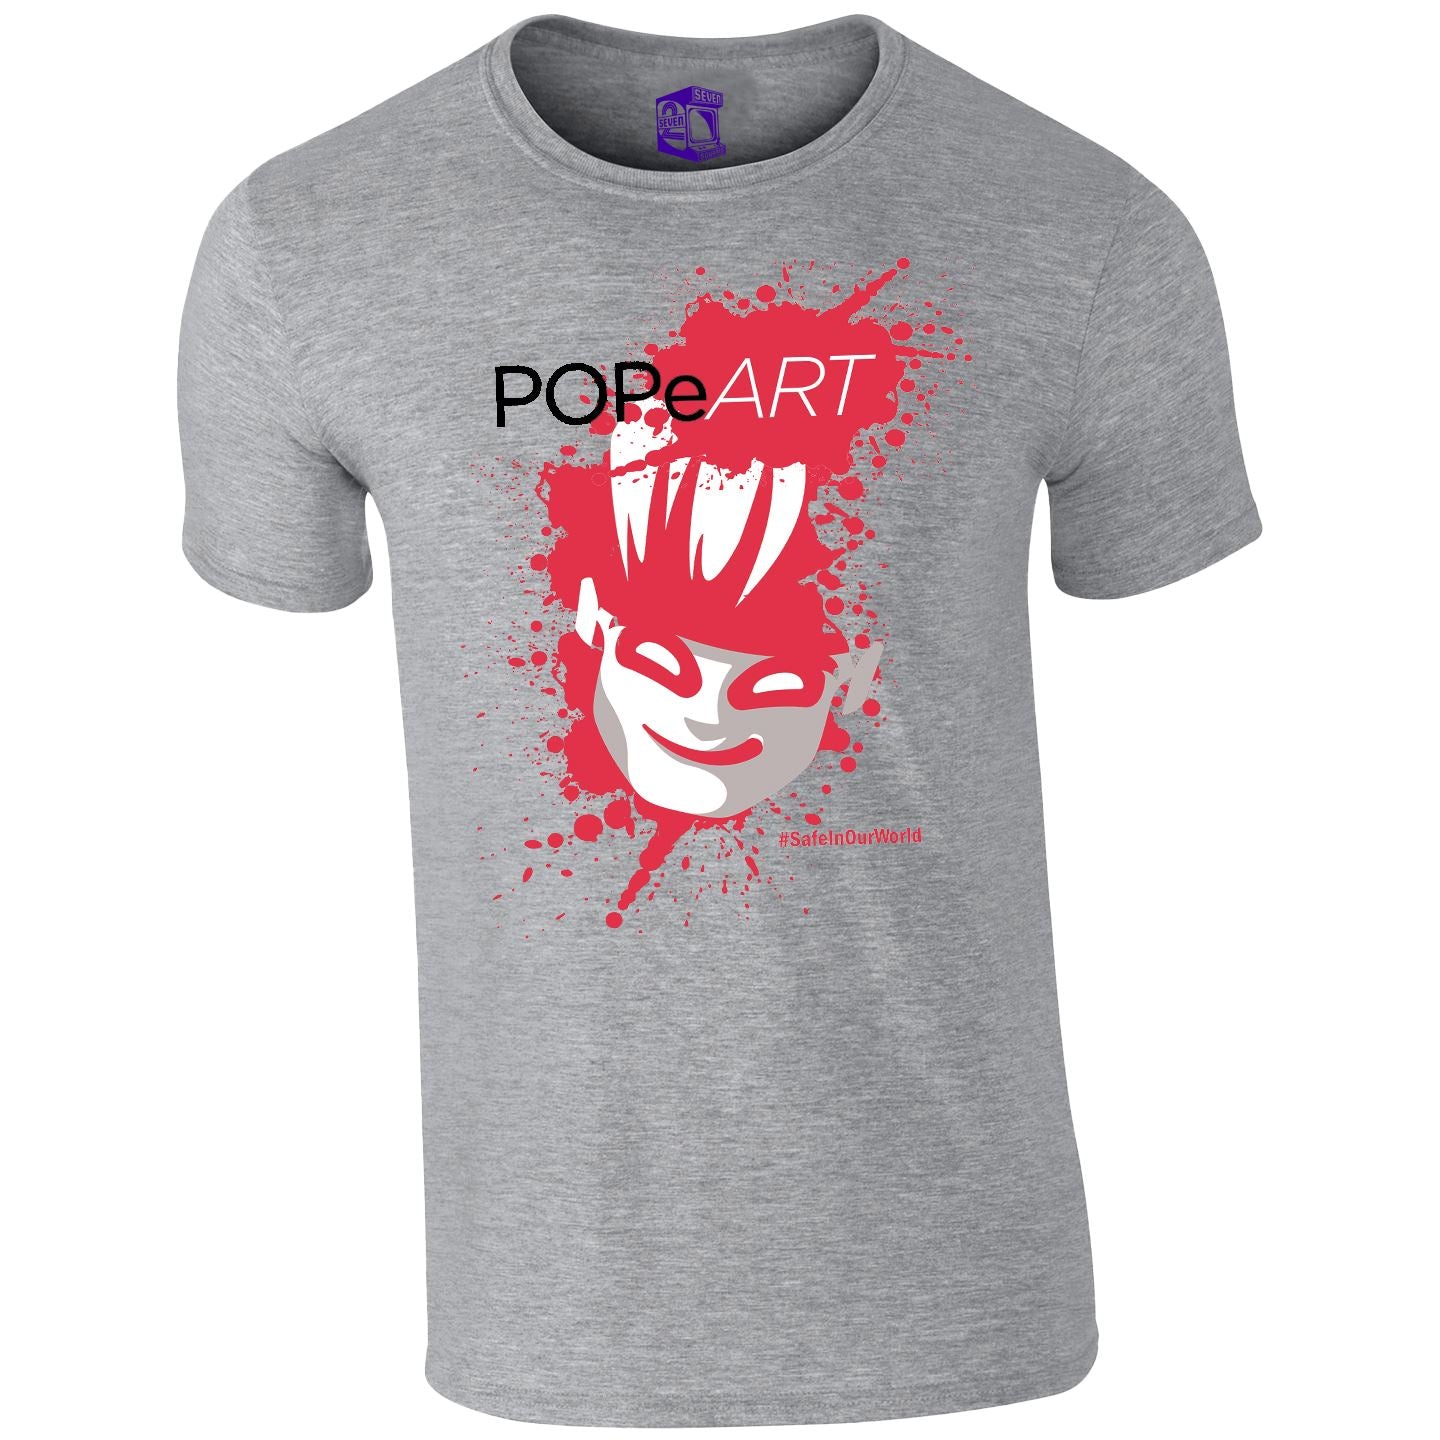 POPeART T-Shirt (SIOW Edition) T-Shirt Seven Squared Small 34-36" Grey 